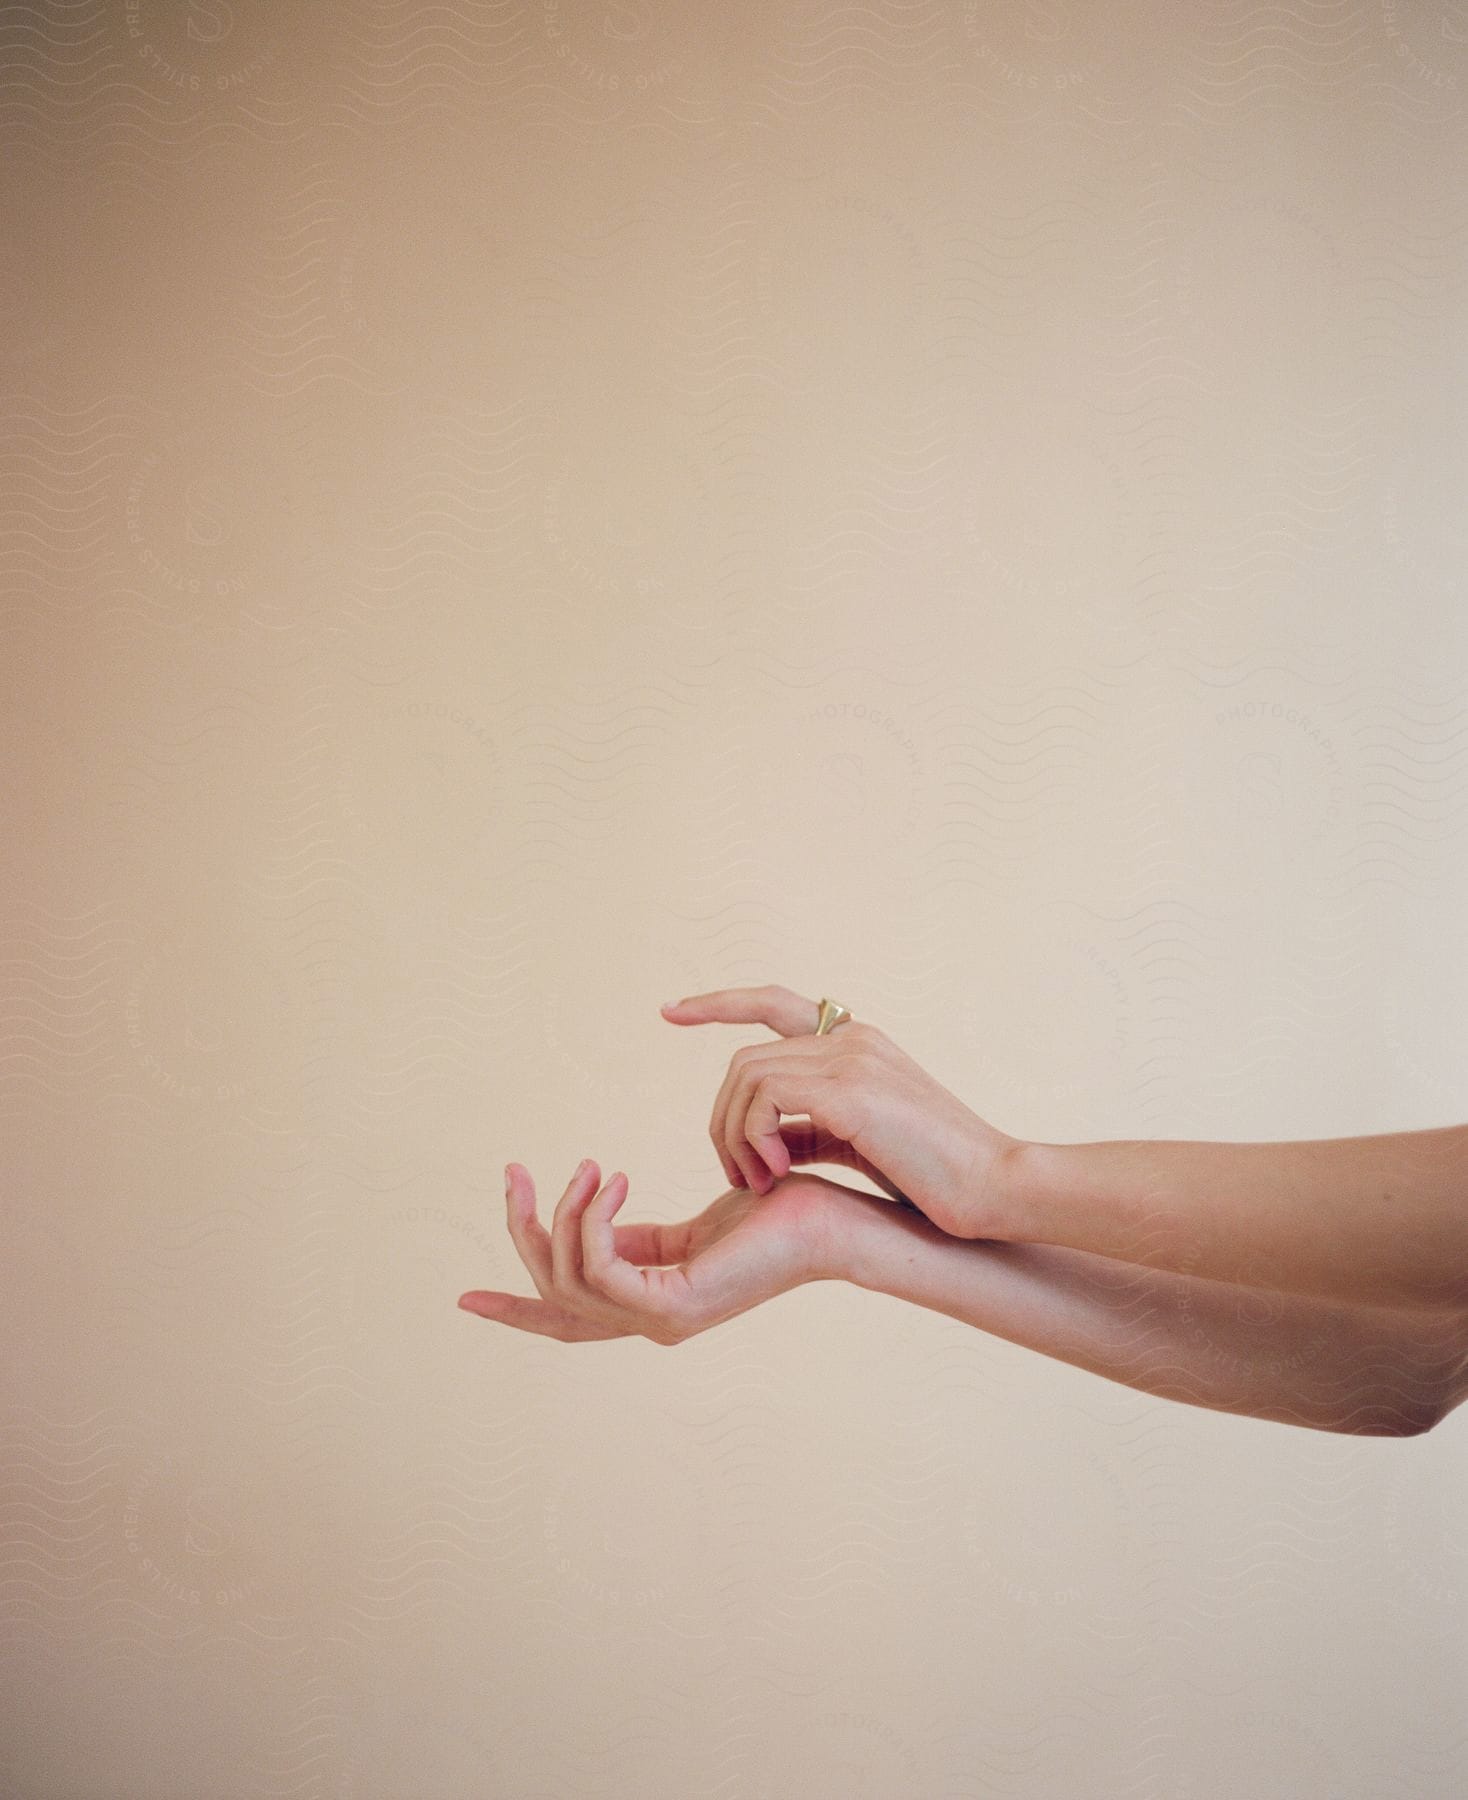 A woman poses with her arms out and hands together as she makes a gesture with her fingers